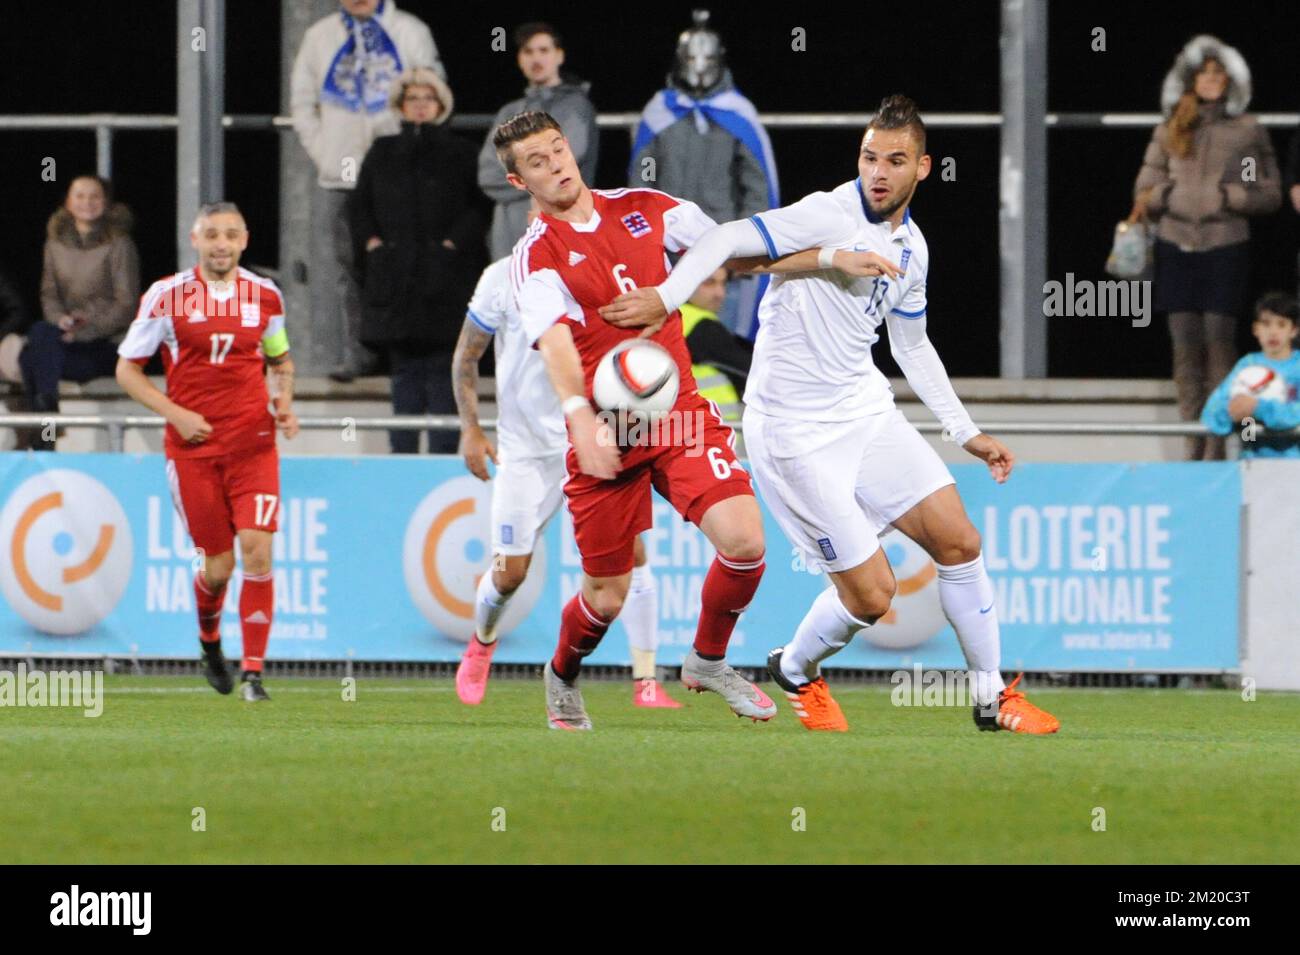 20151113 - DIFFERDANGE, LUXEMBOURG: Luxembourg's Chris Philipps and Greece's Panagiotis Tachtsidis fight for the ball during a friendly soccer game between Luxembourg national team and Greece, in Differdange, Luxembourg, Friday 13 November 2015. BELGA PHOTO SOPHIE KIP Stock Photo